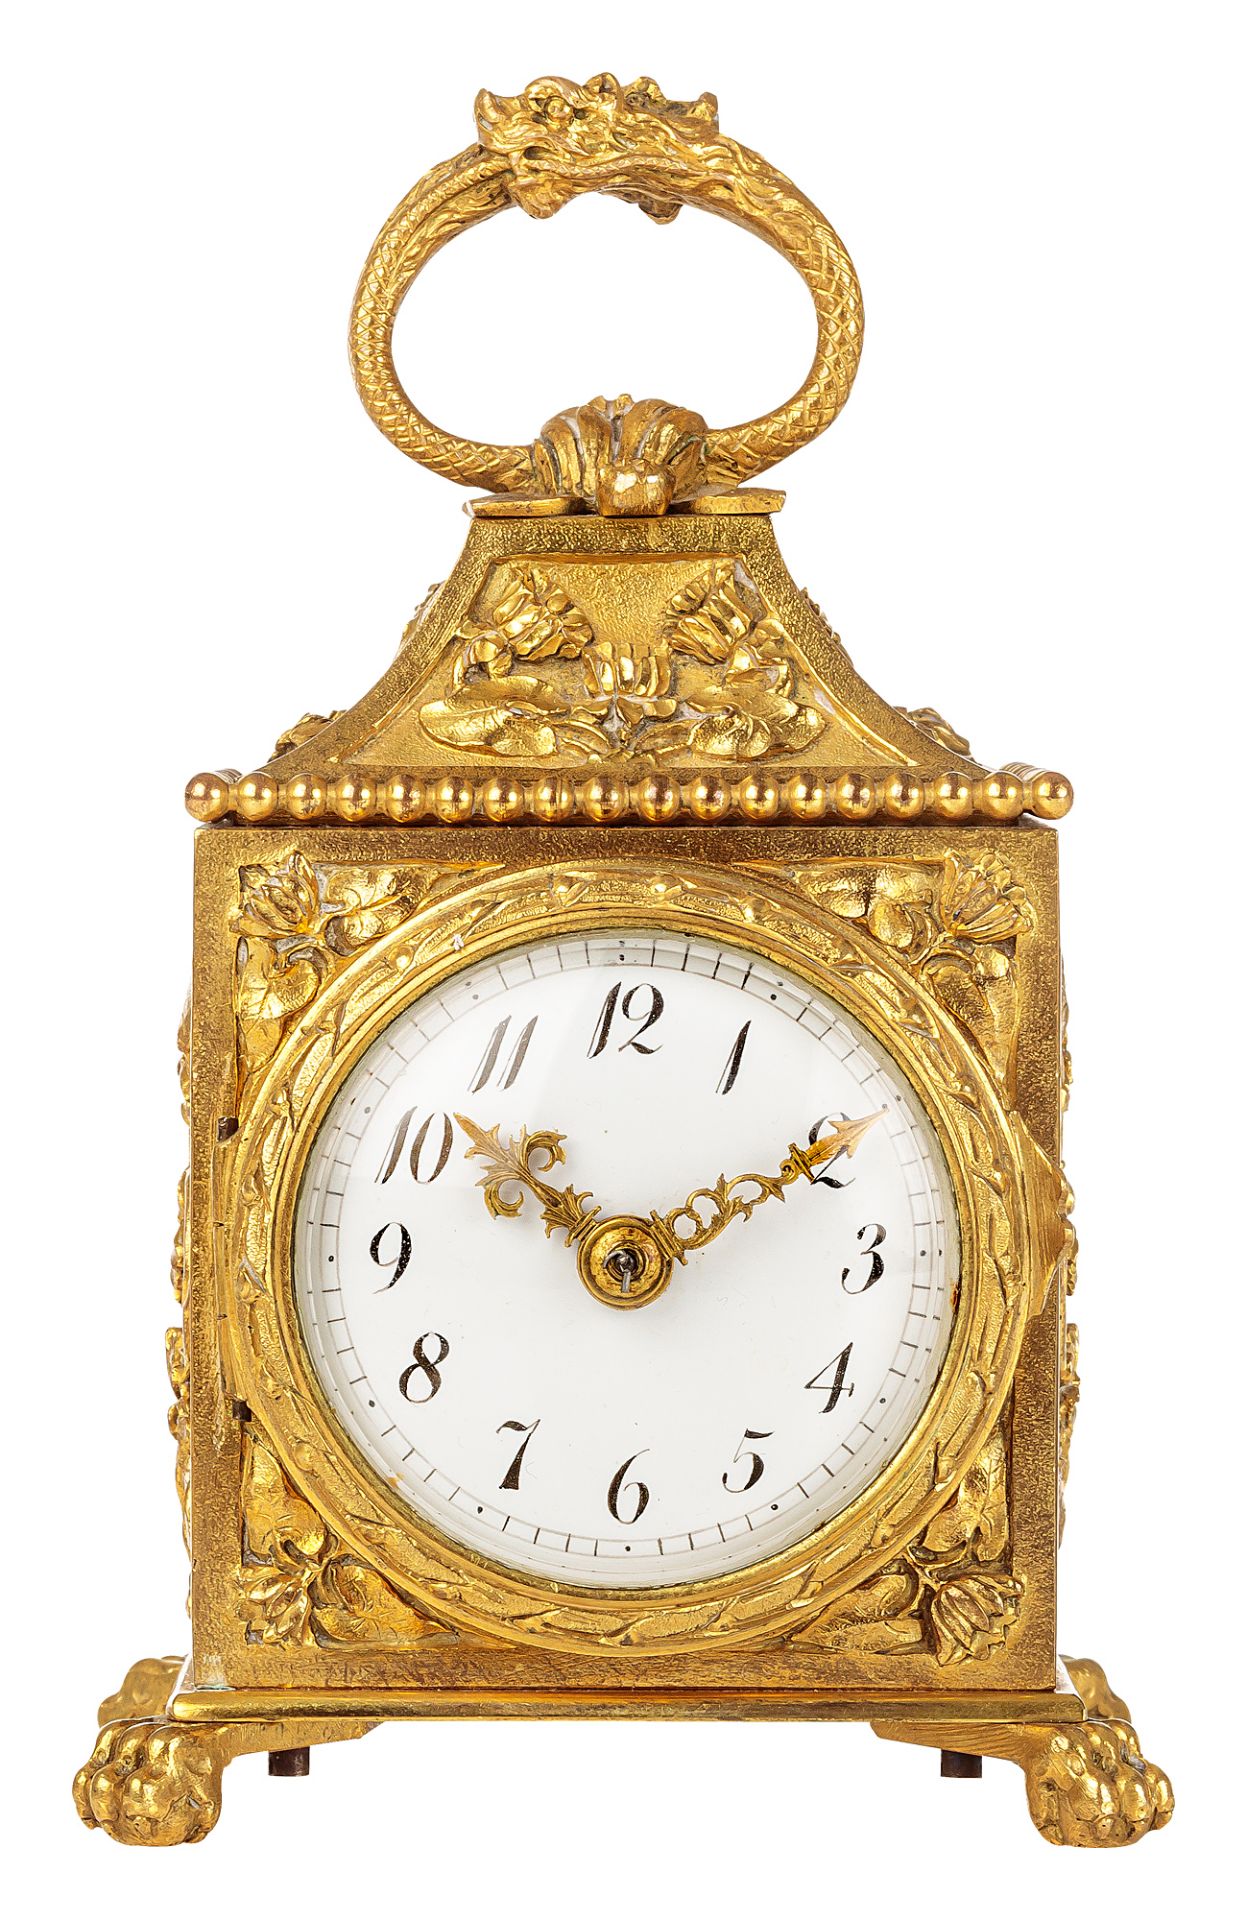 Small officer's carriage clock - Image 2 of 2